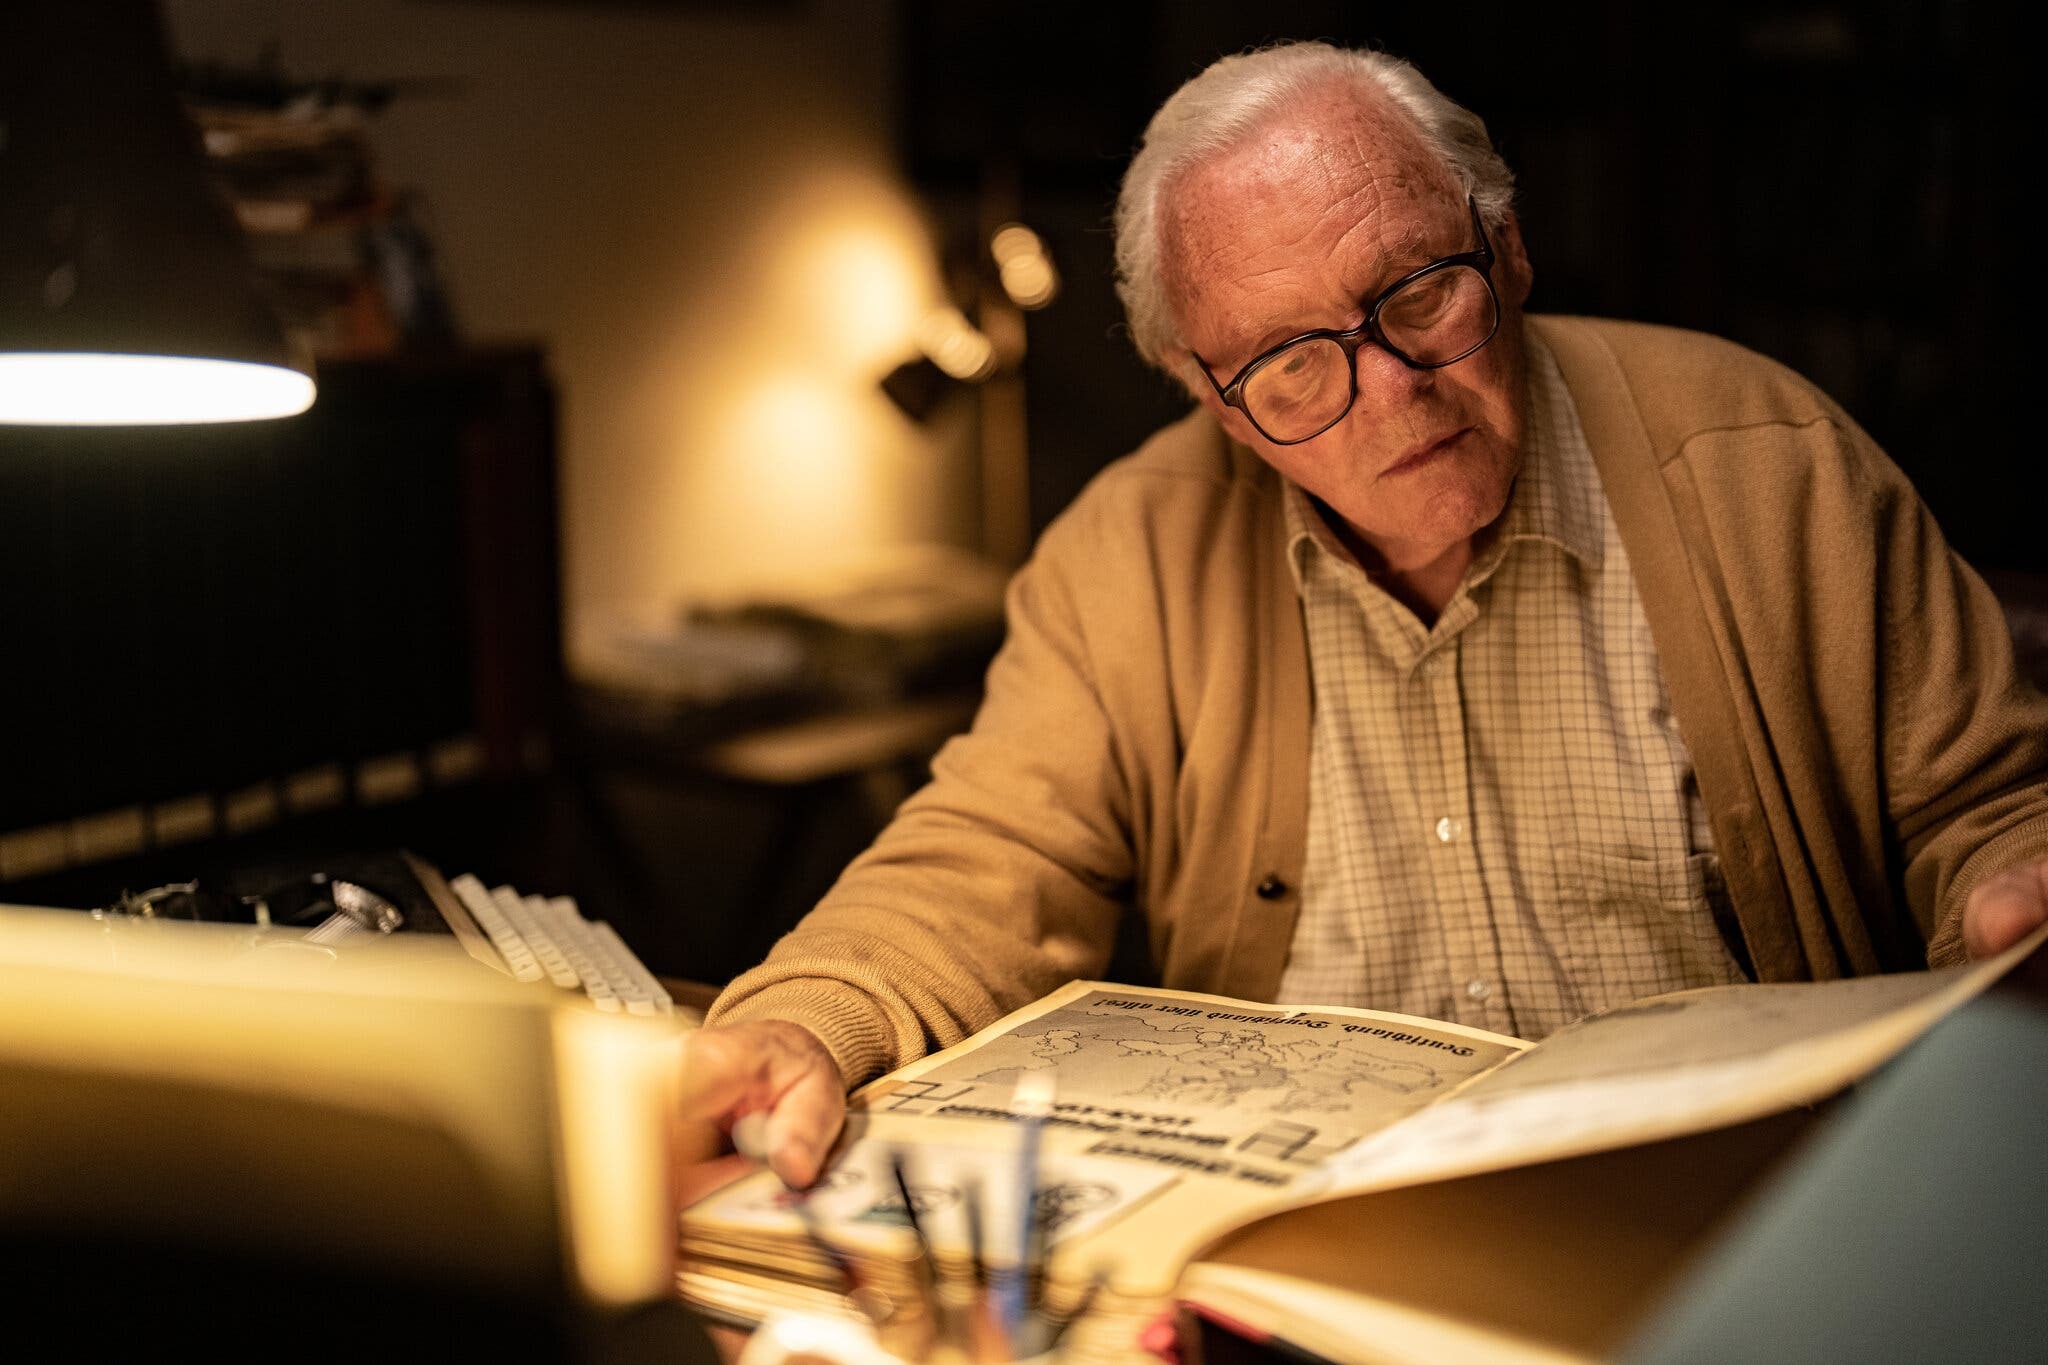 An older bespectacled gentleman surrounded in warm light looks over a large book of text.